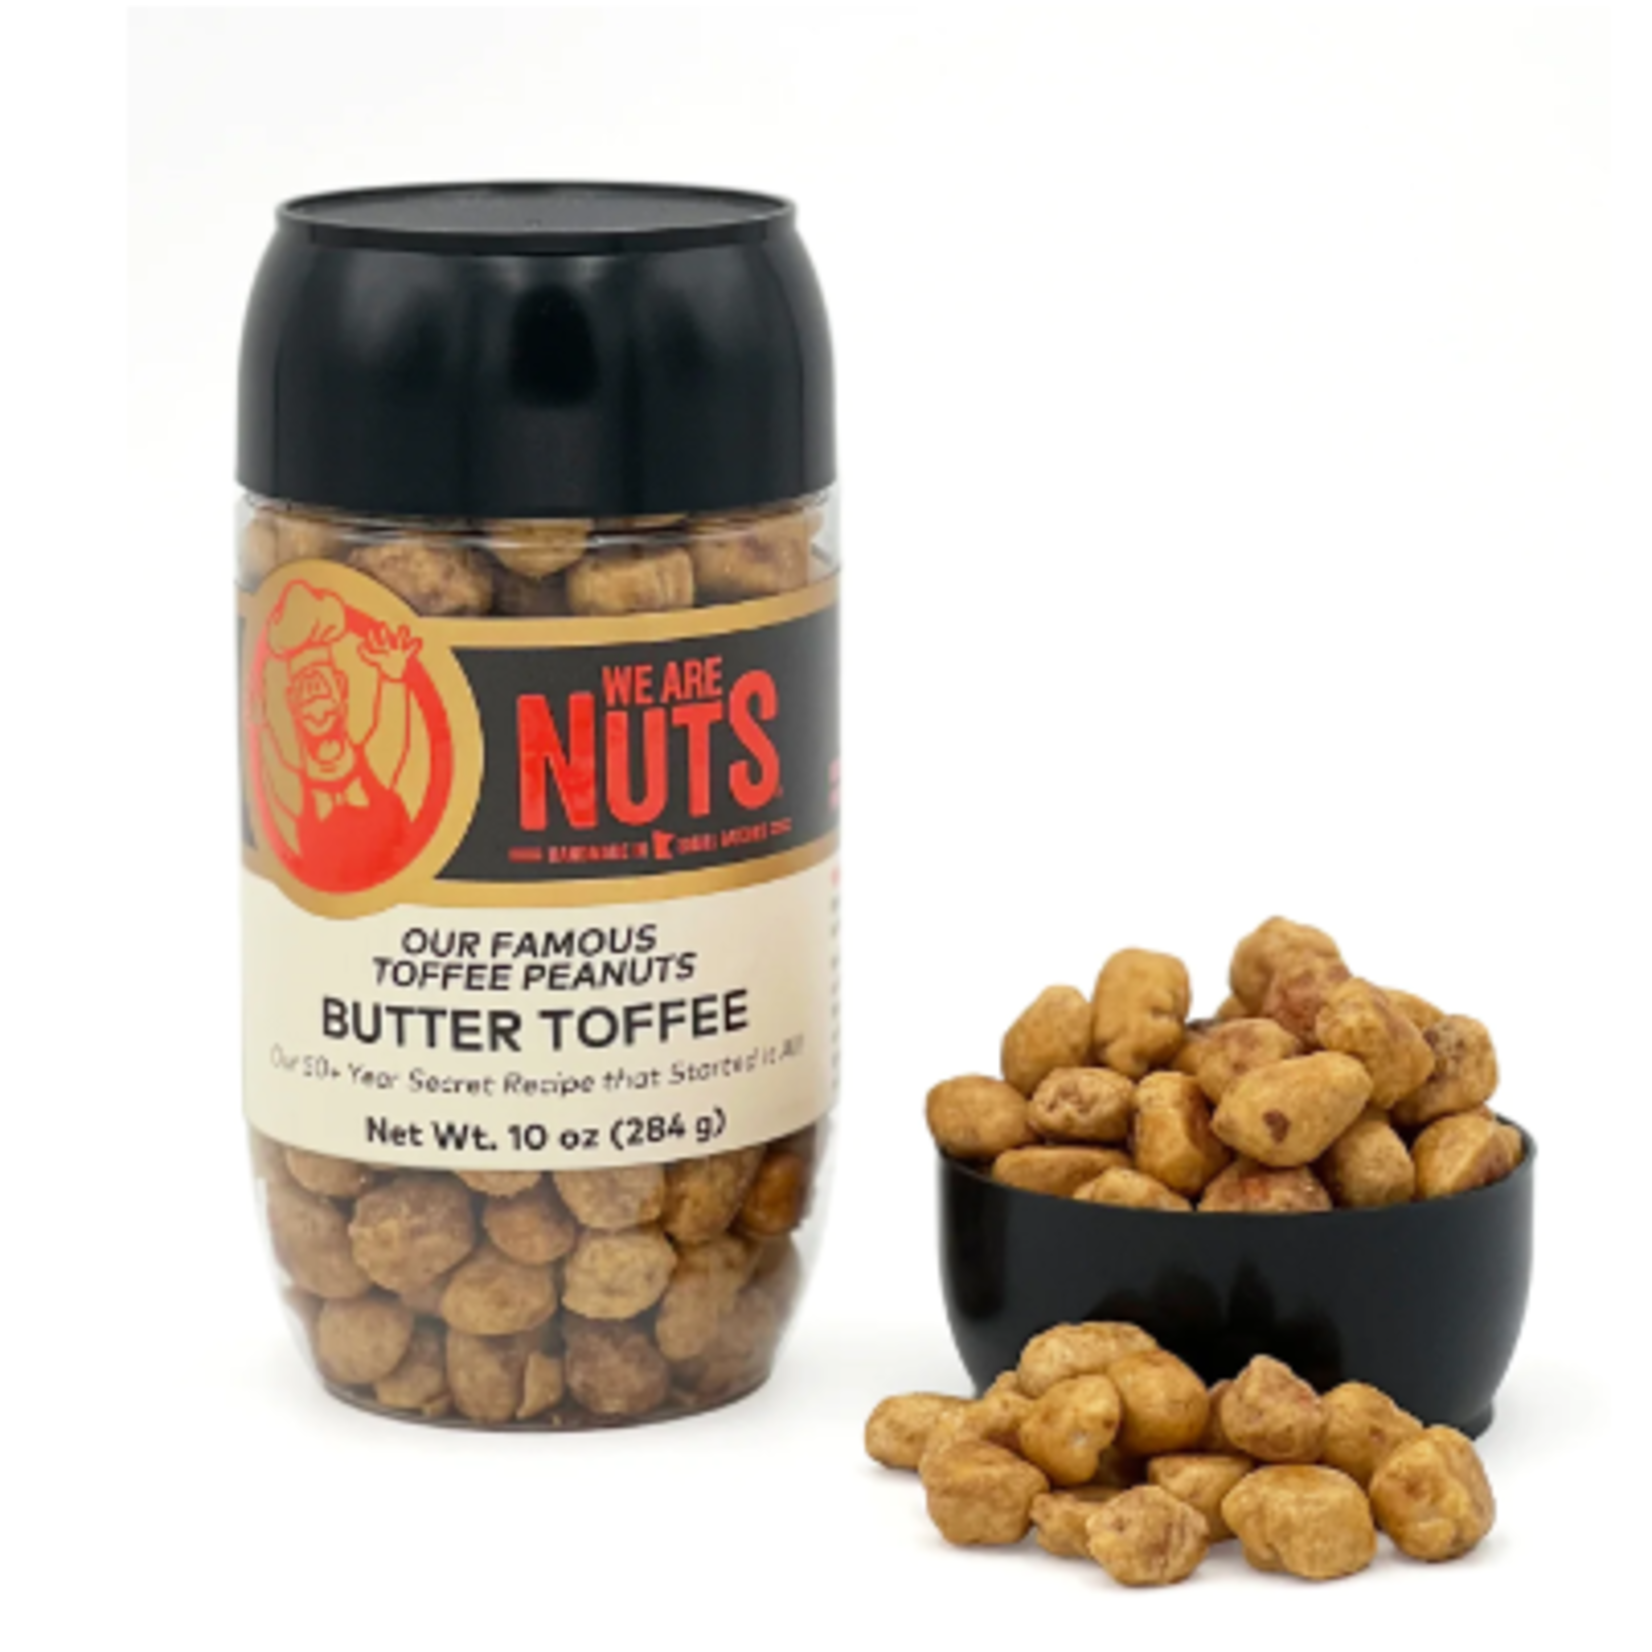 We Are Nuts We Are Nuts - Original Toffee Peanuts, 10 Oz